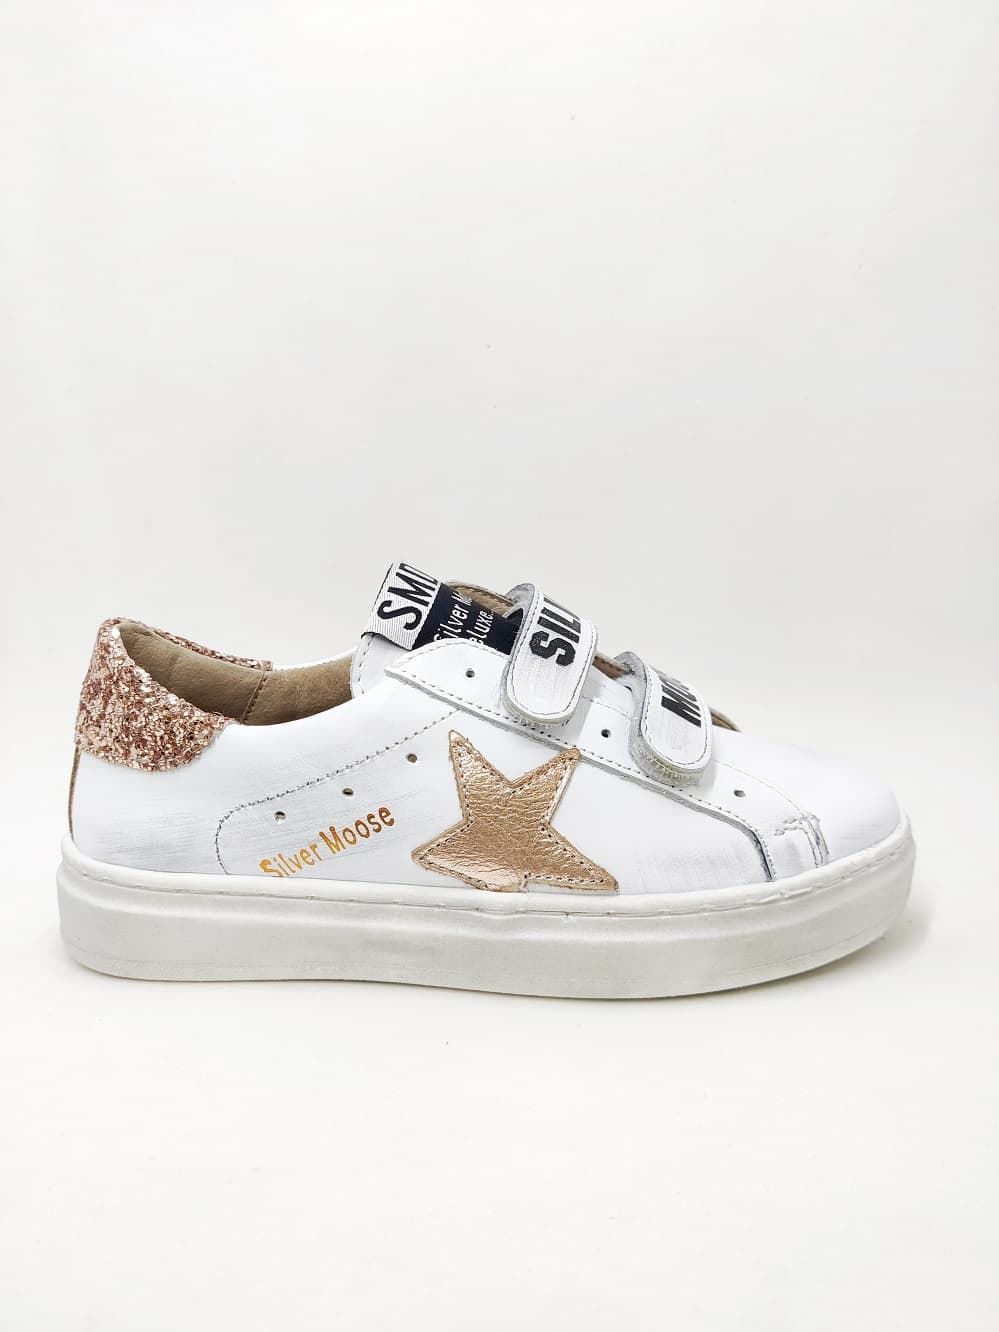 Golden Star White Glitter Nude leather sneakers with Velcro Yowas - Image 1